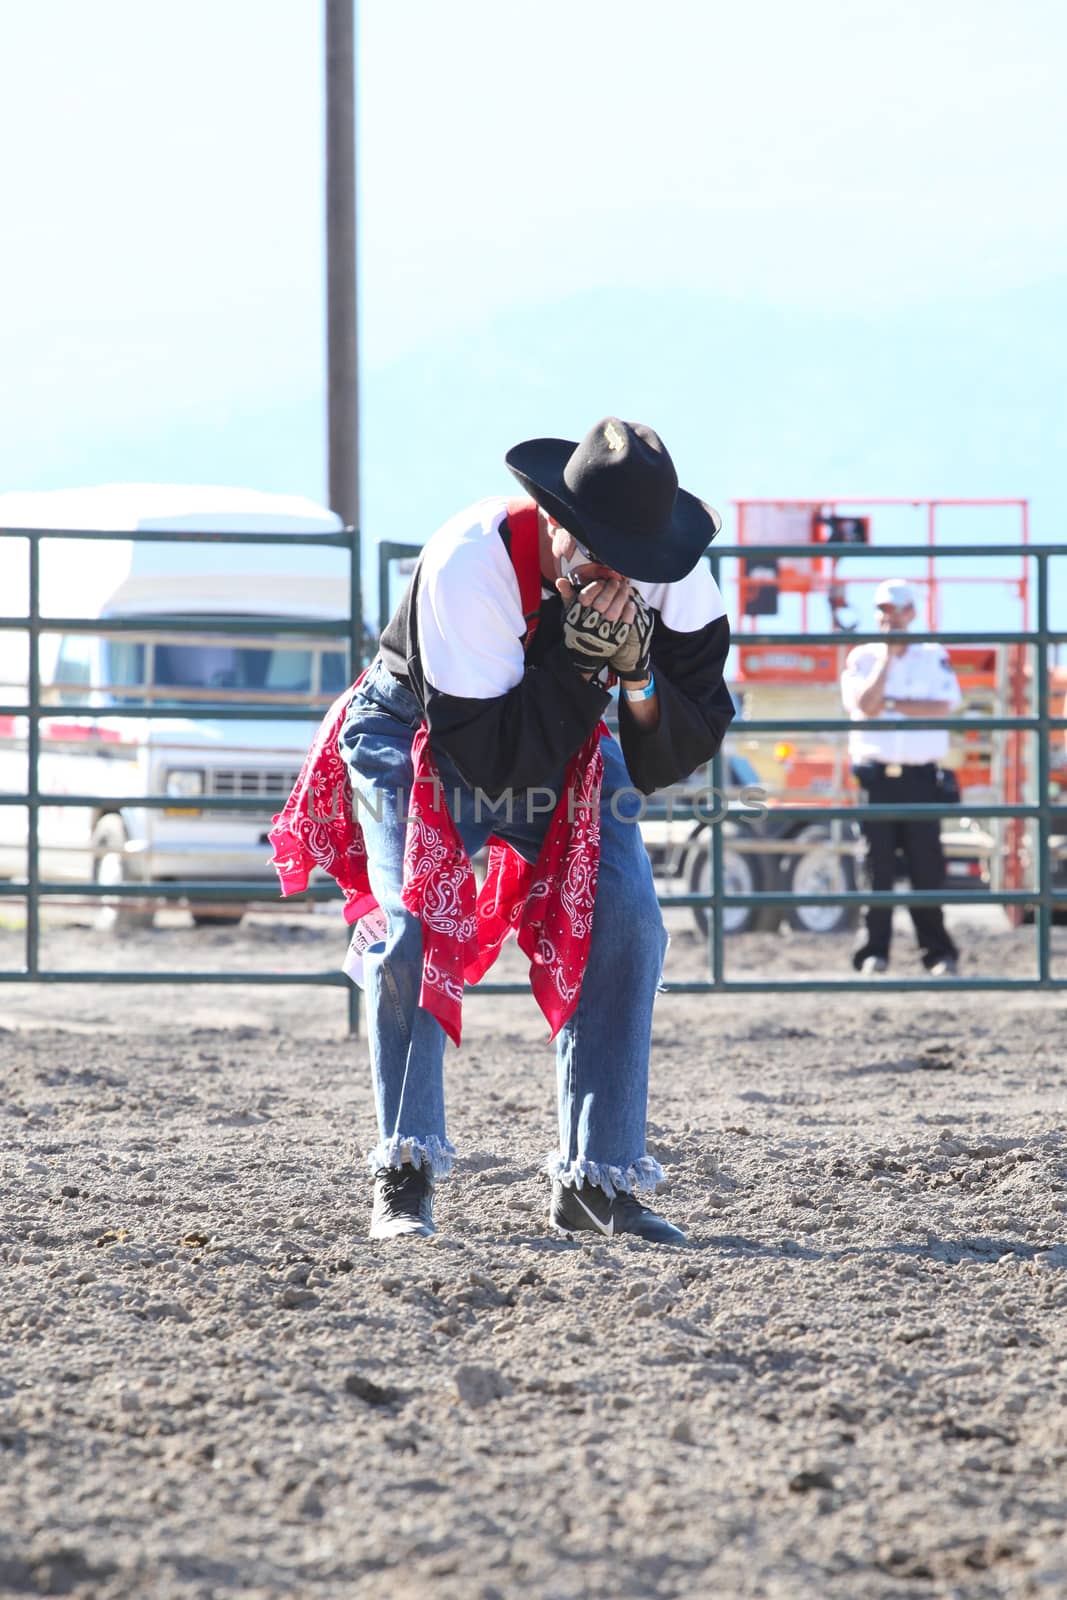 MERRITT, B.C. CANADA - May 30, 2015: Rodeo Clown in the arena during The 3rd Annual Ty Pozzobon Invitational PBR Event.